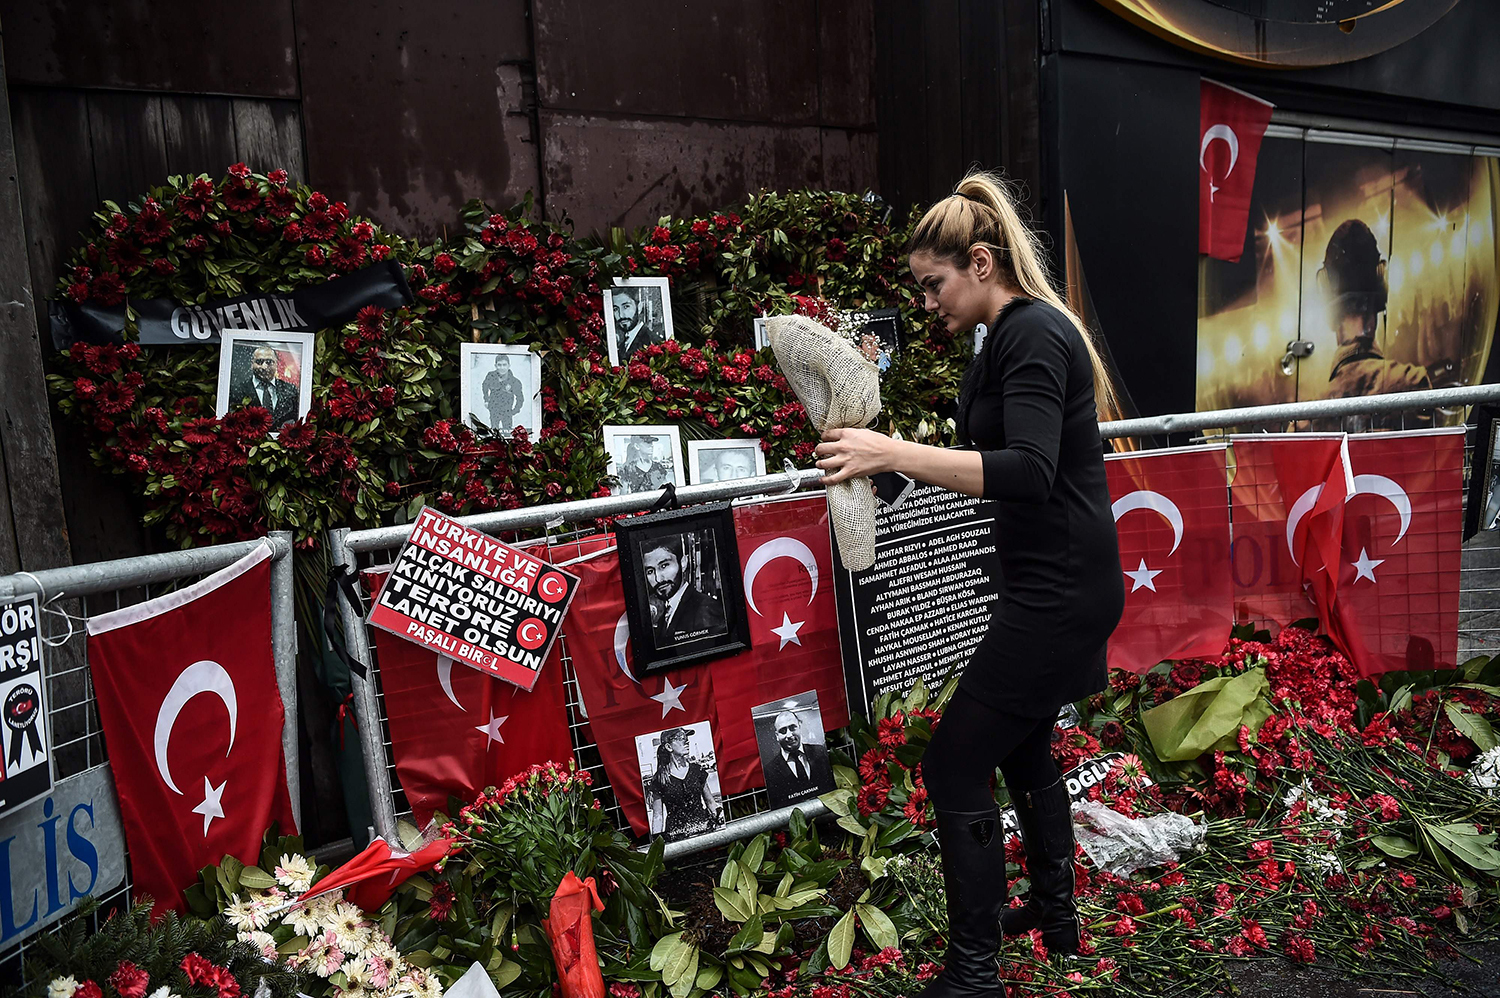 TOPSHOT - A woman lays flowers by a makeshift memorial in front of the Reina nightclub in Istanbul on January 17, 2017, a day after Turkish police arrested the suspected attacker. A 34-year-old Uzbek man suspected of mowing down 39 people at an Istanbul nightclub on New Year's Eve confessed today to the massacre, Turkish authorities said. In a dramatic assault in the early hours of Tuesday morning, Turkish police raided an Istanbul apartment and detained Abdulgadir Masharipov after a massive weeks-long manhunt. / AFP PHOTO / OZAN KOSE / TT / kod 444